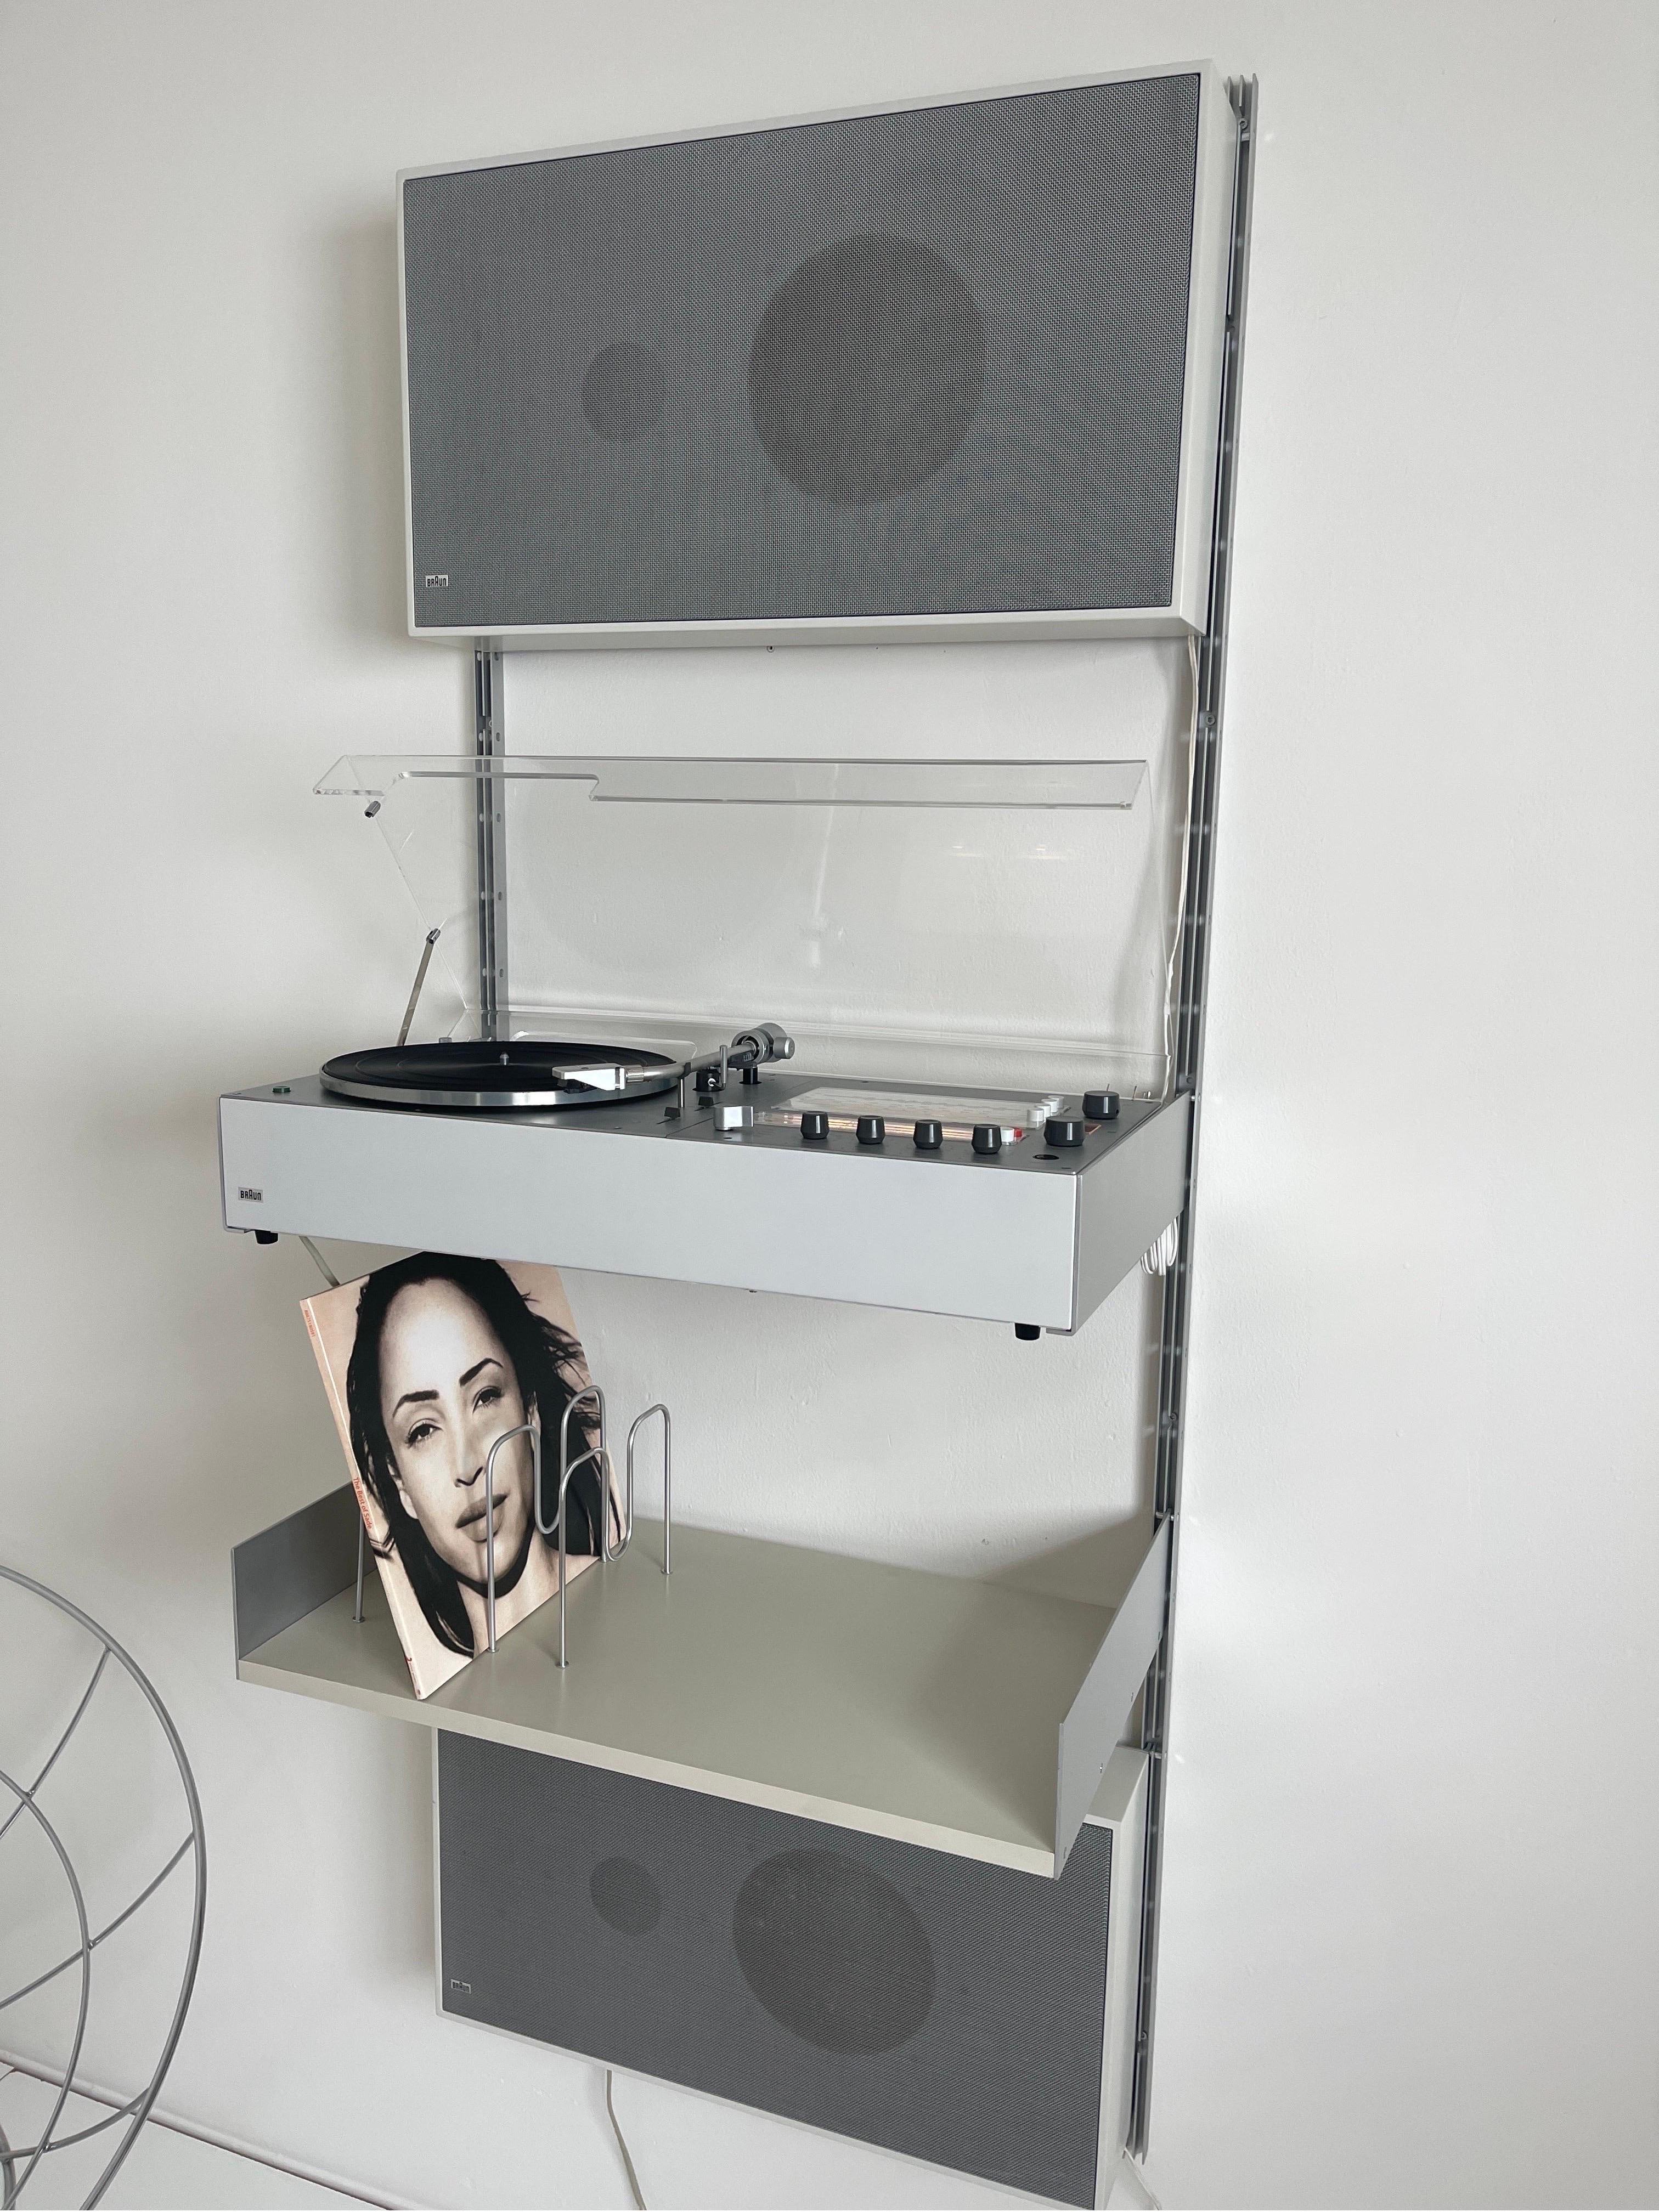 German Braun Audio wall mounted audio system designed by Dieter Rams 